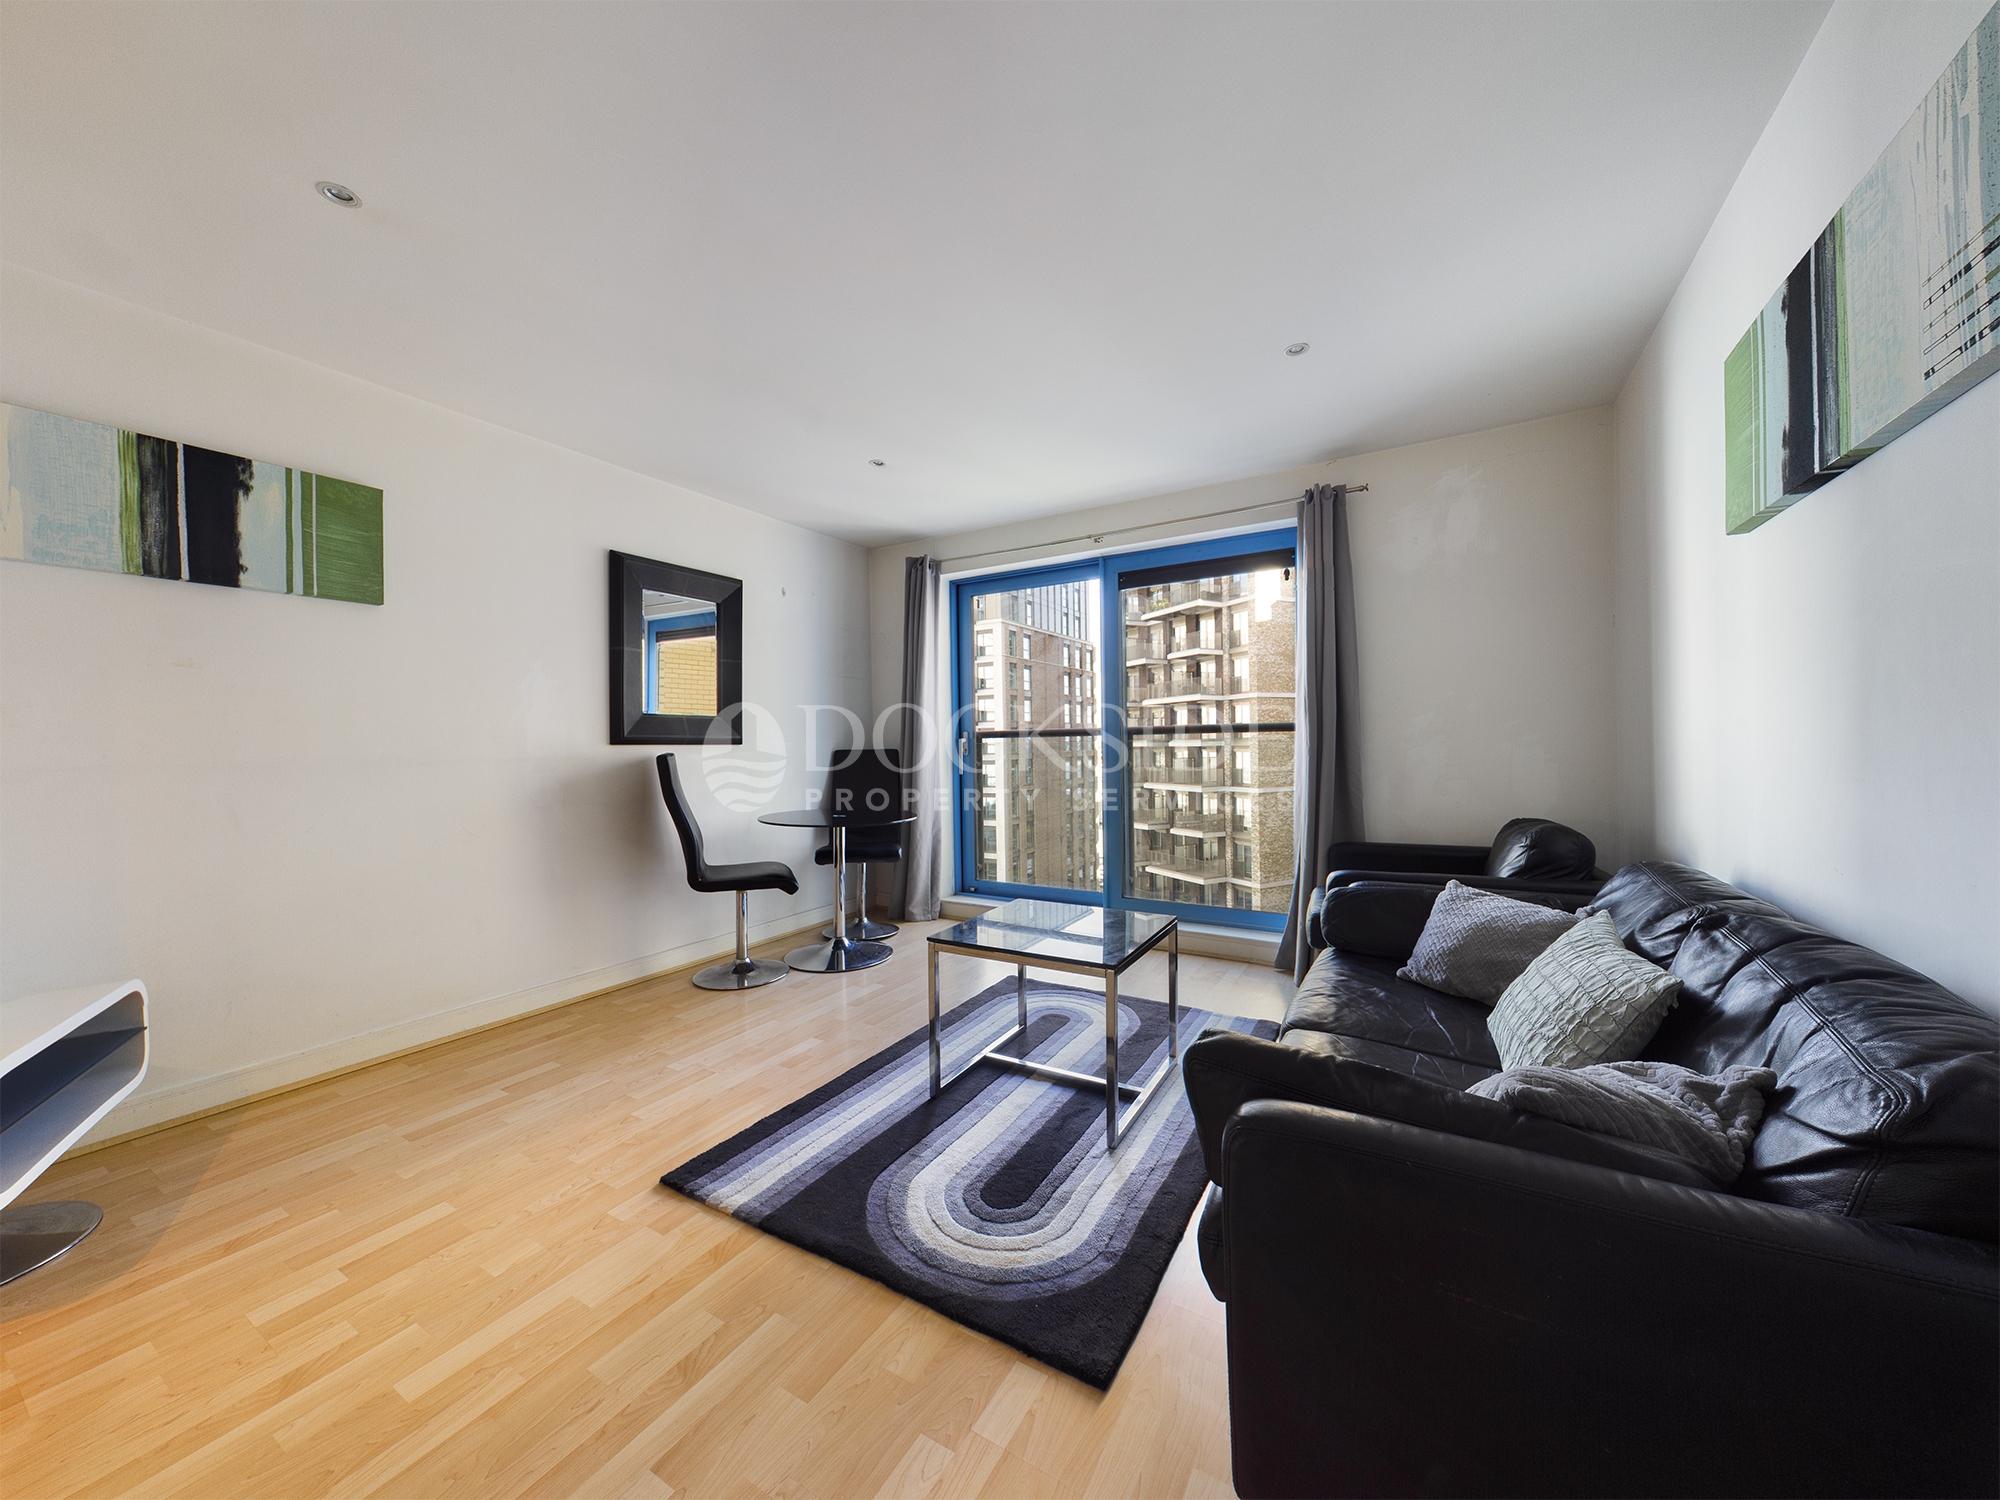 1 bed flat for sale in Westgate Apartments, London - Property Image 1